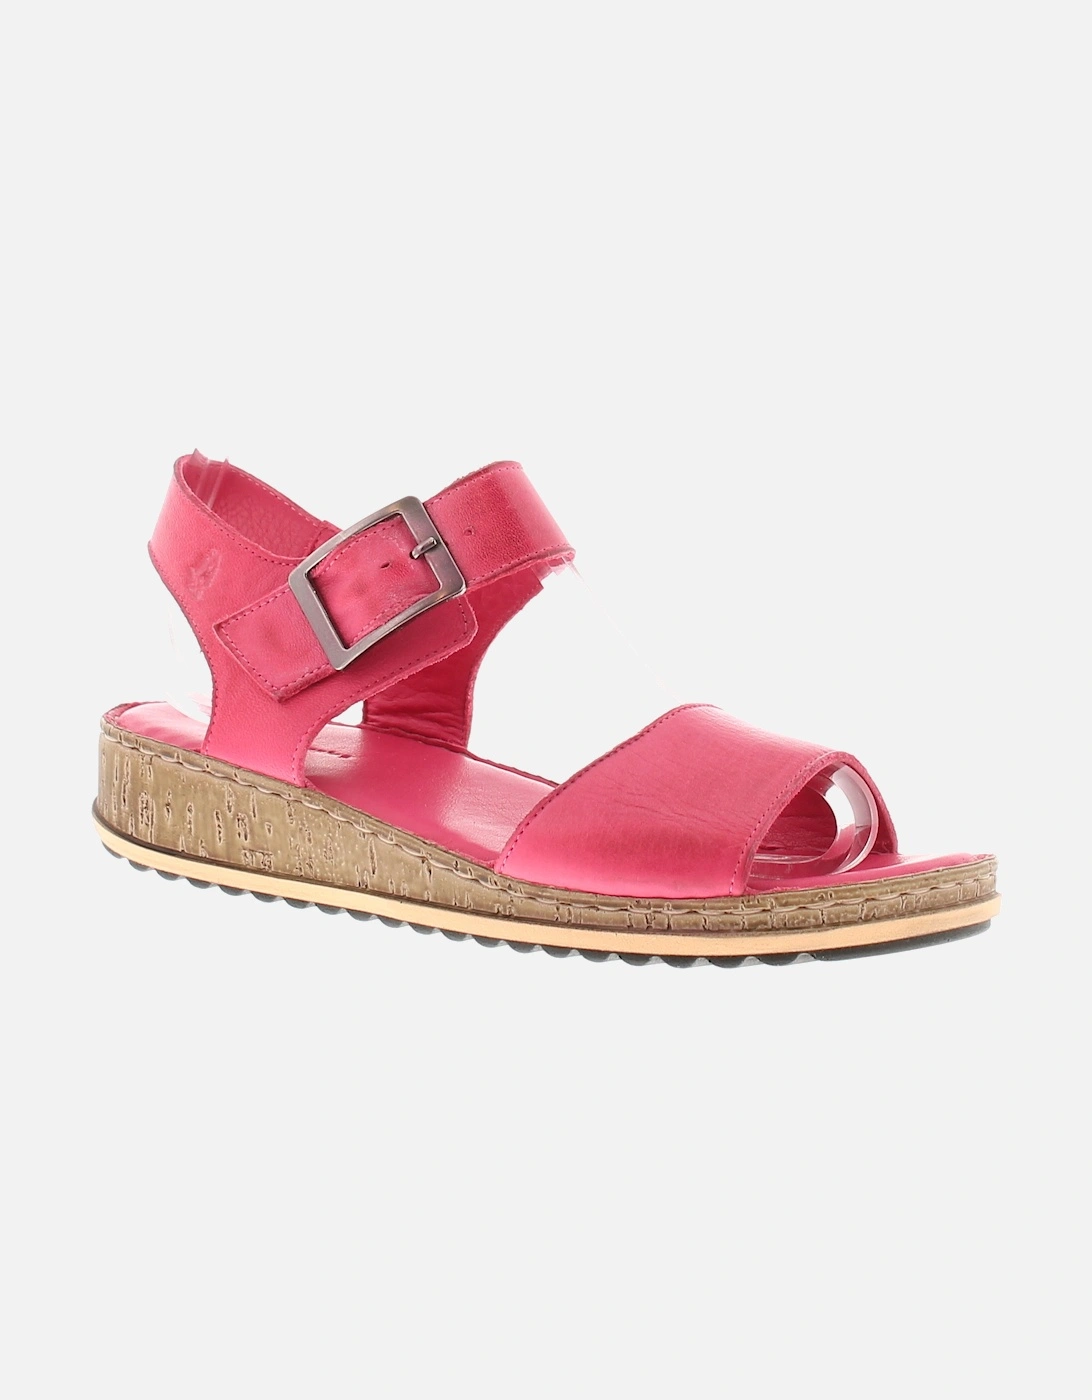 Womens Sandals Low Wedge Ellie Leather Buckle pink UK Size, 6 of 5